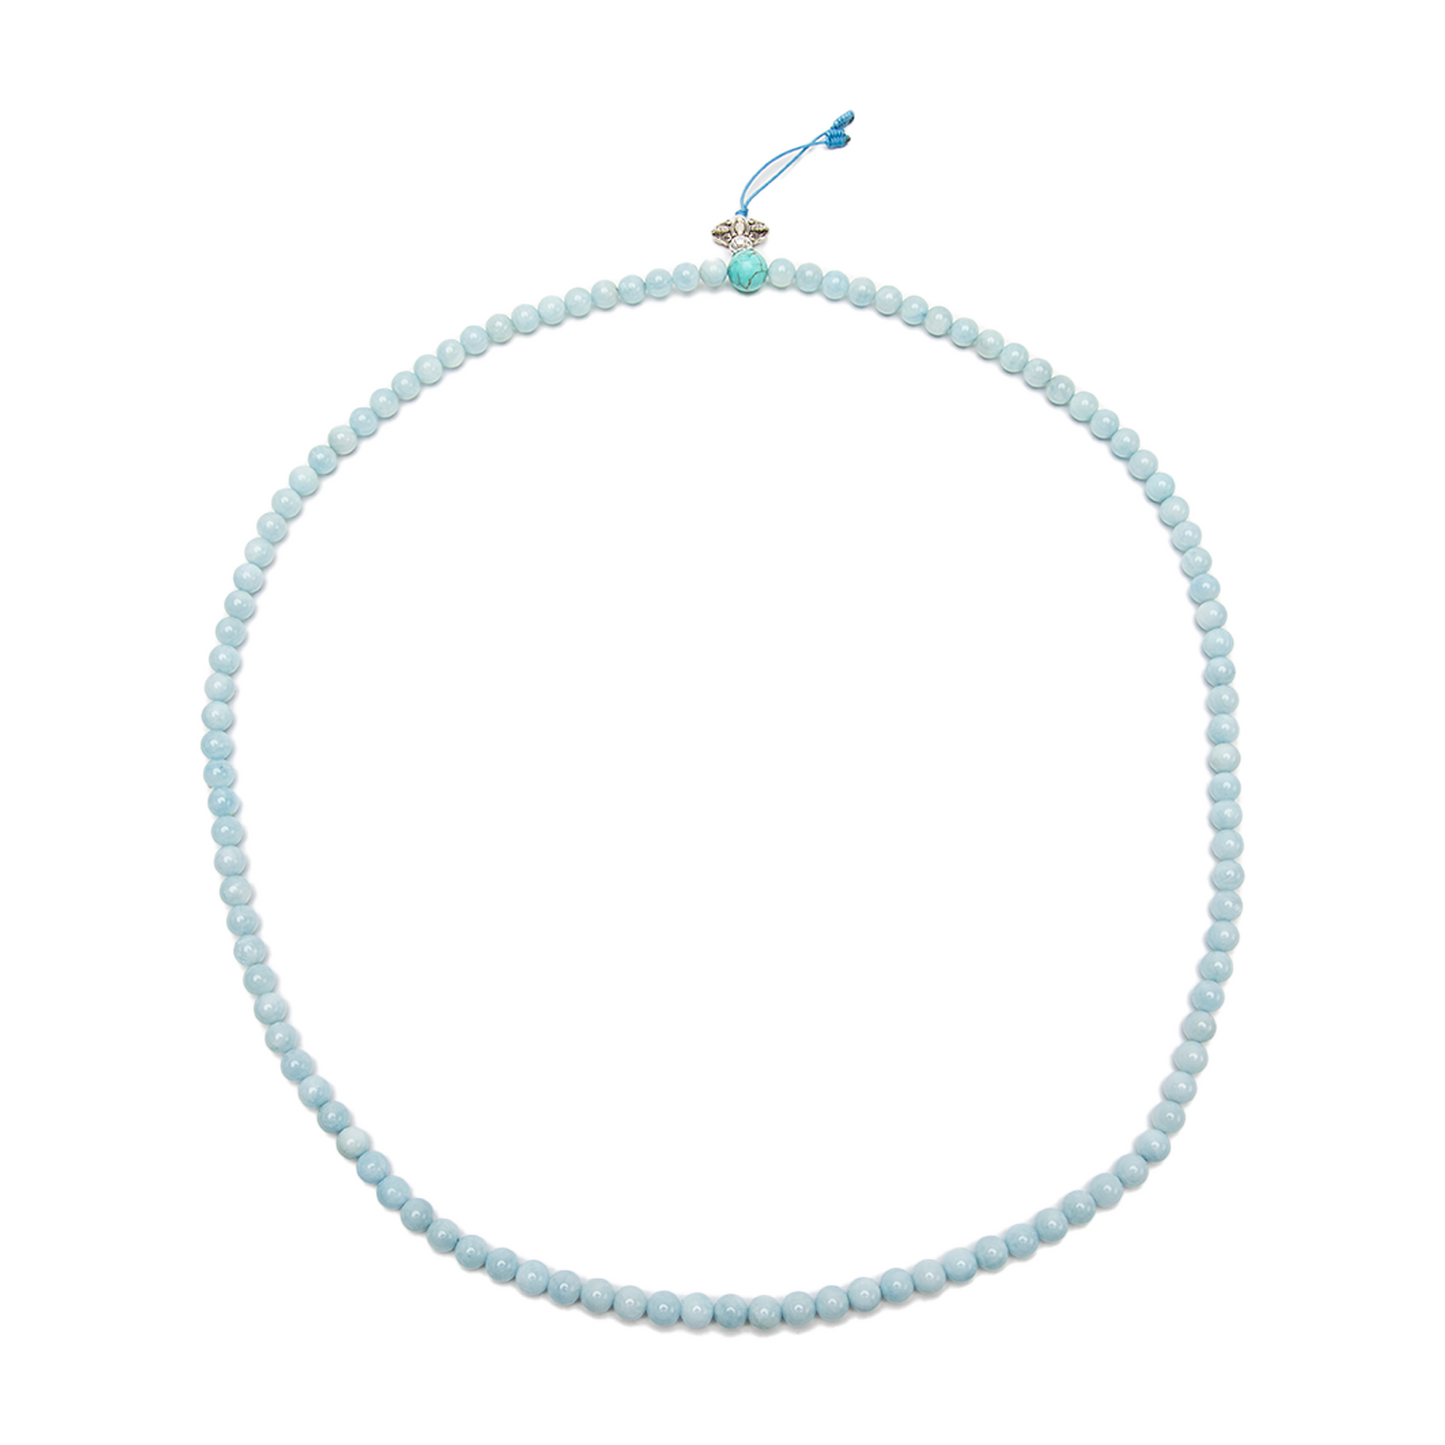 The Aquamarine Mala rests on a solid white backdrop. It is laid flat to form a perfect oval.